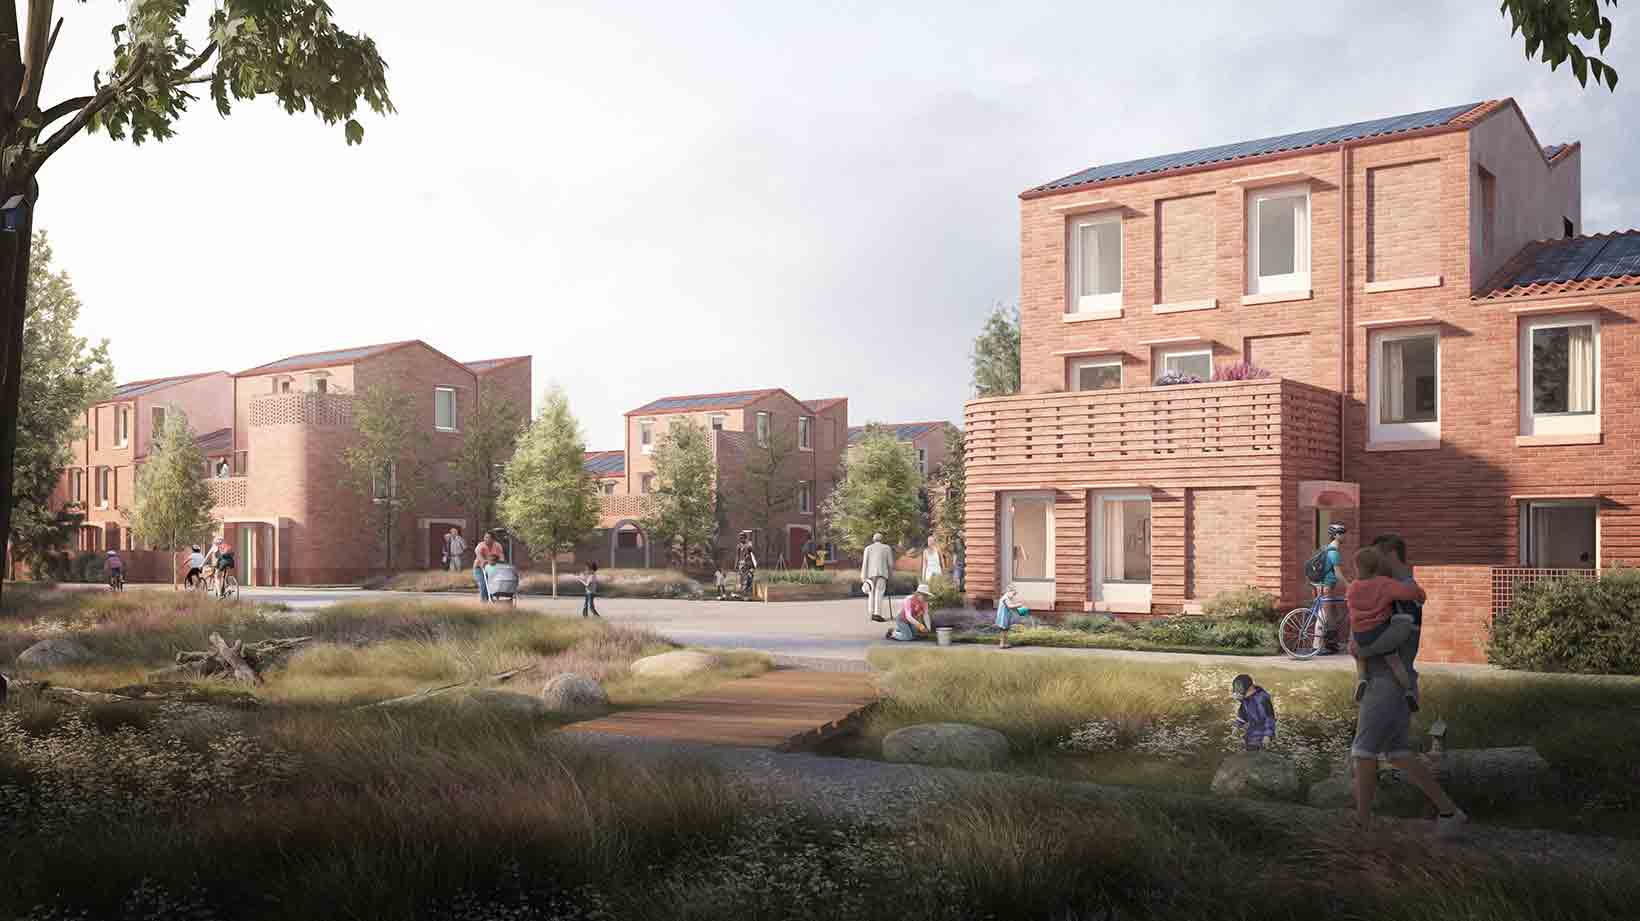 An artists rendering of the new Burnholme development that is coming soon. The scene shows a collection of new homes with people walking in front of them.